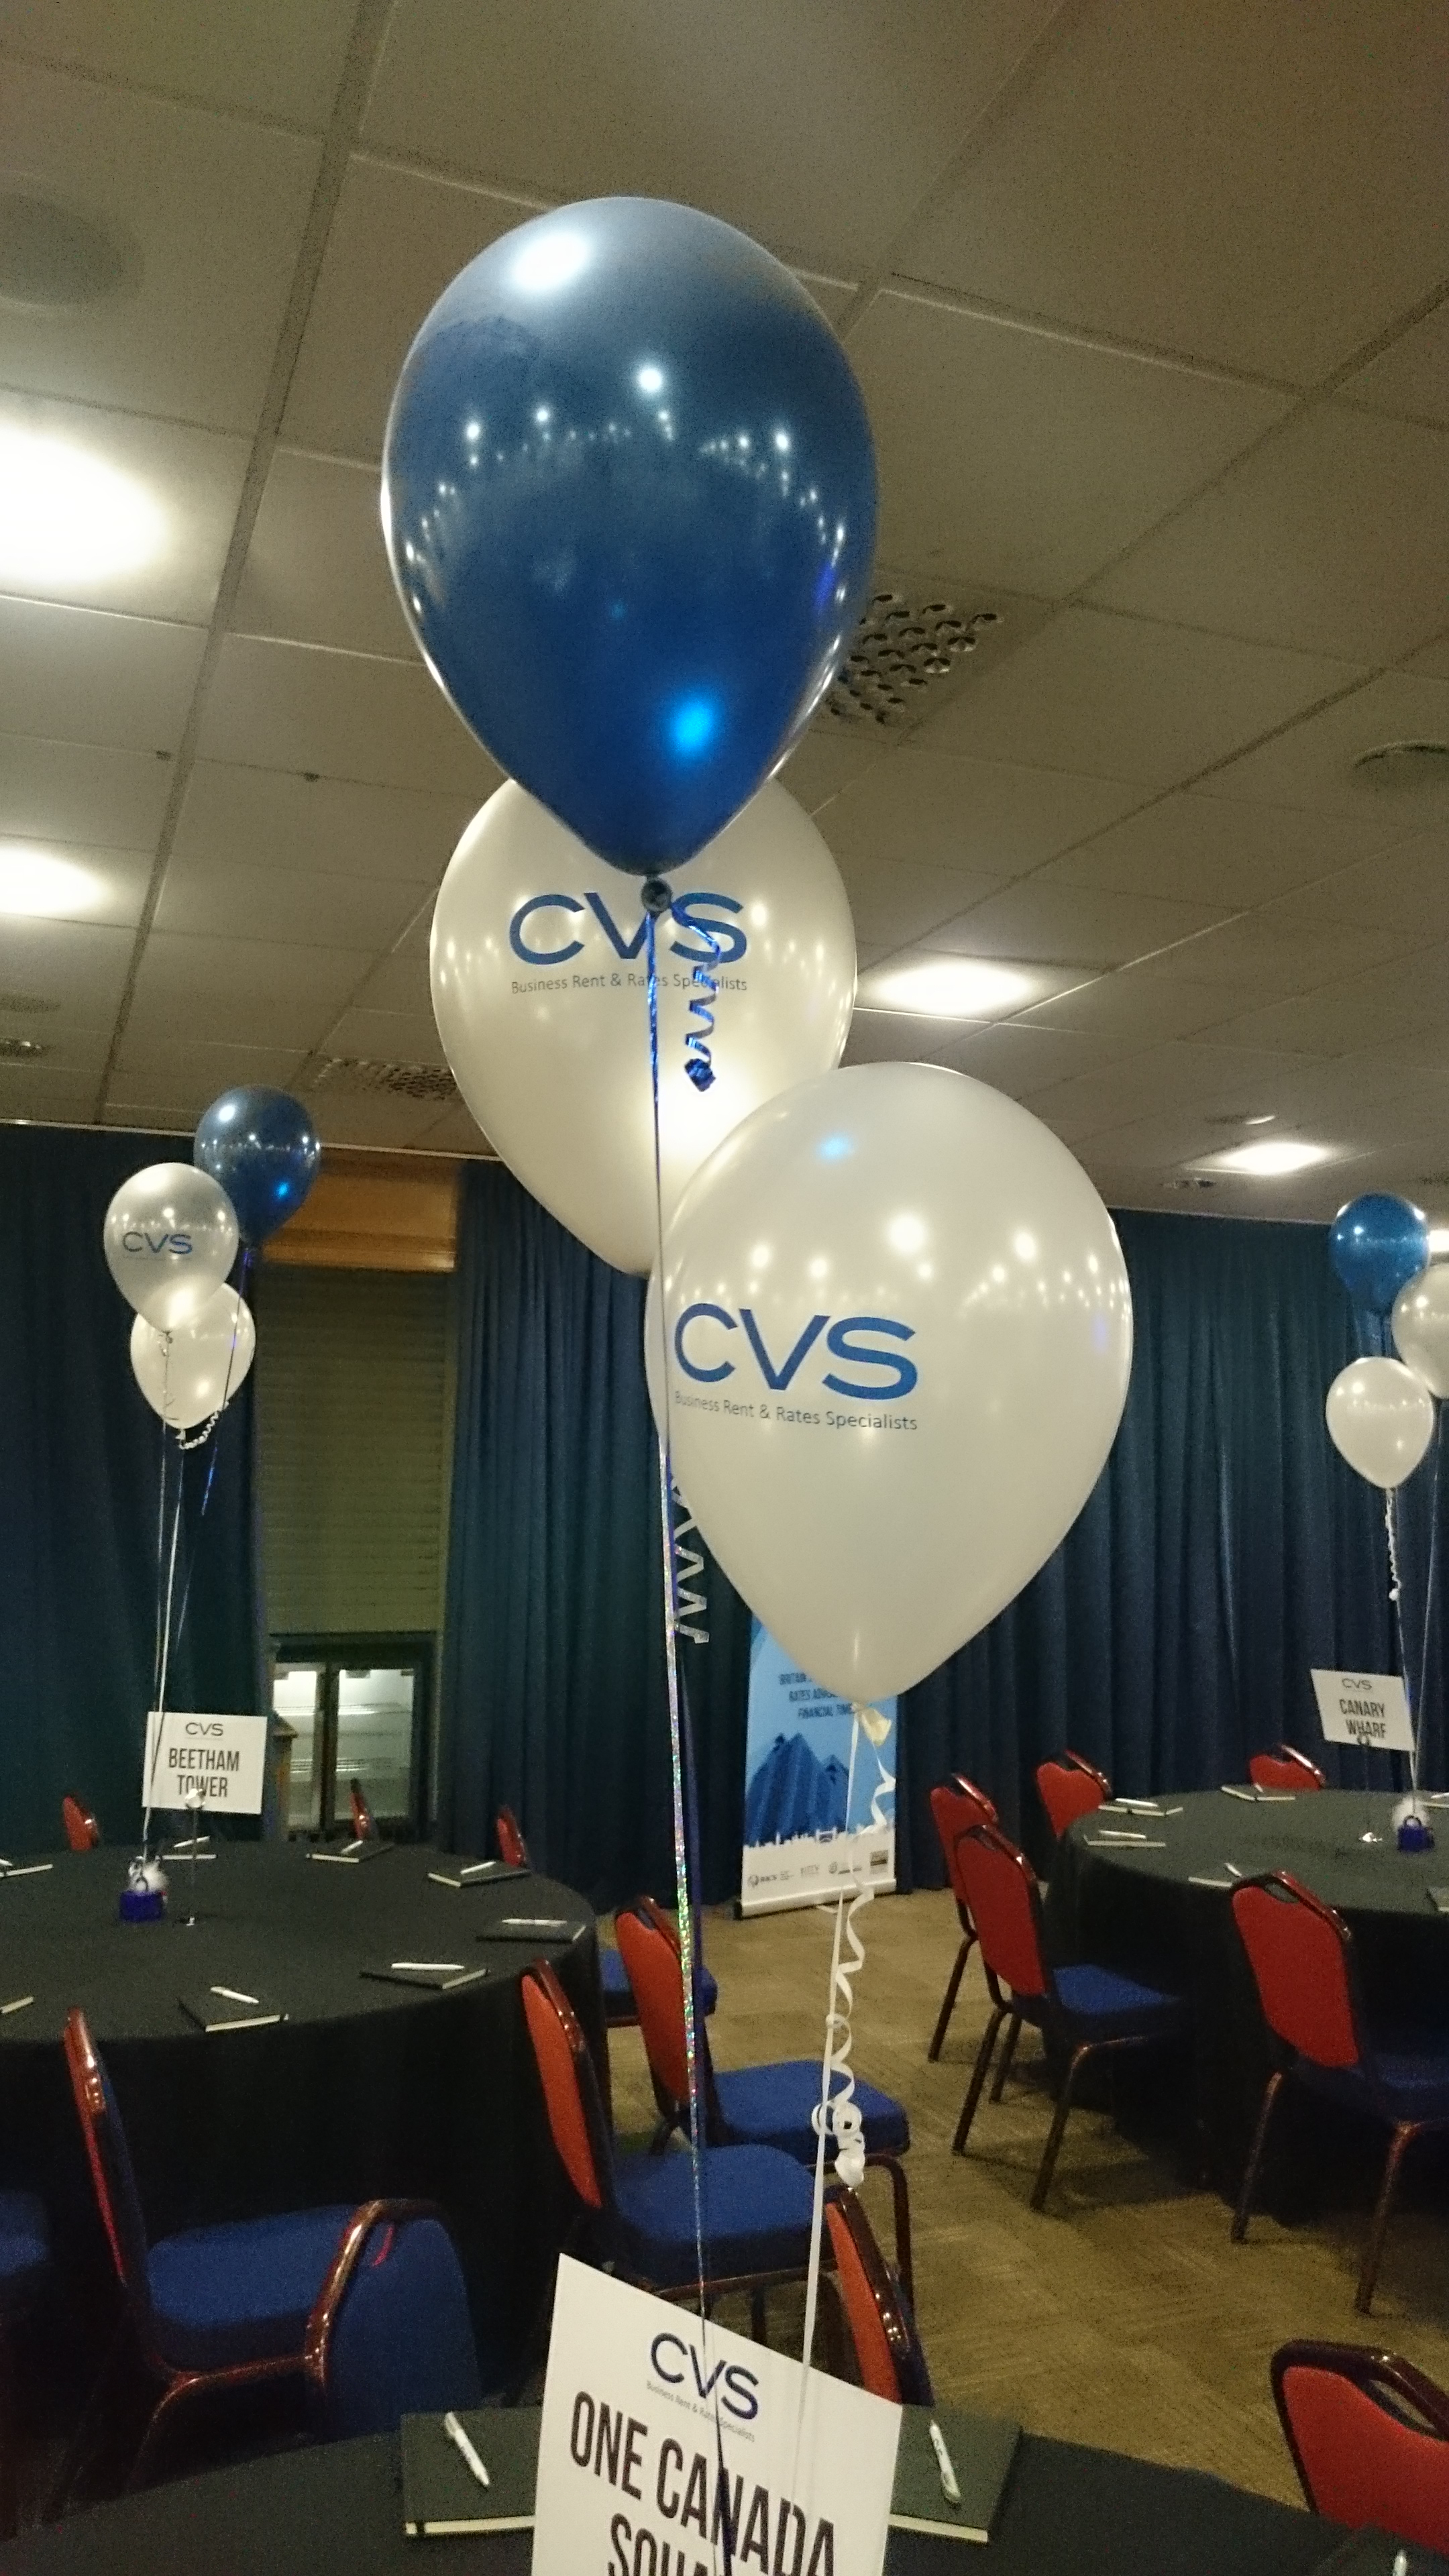 You are currently viewing Balloon Bouquets at the Ricoh Arena with Print Work